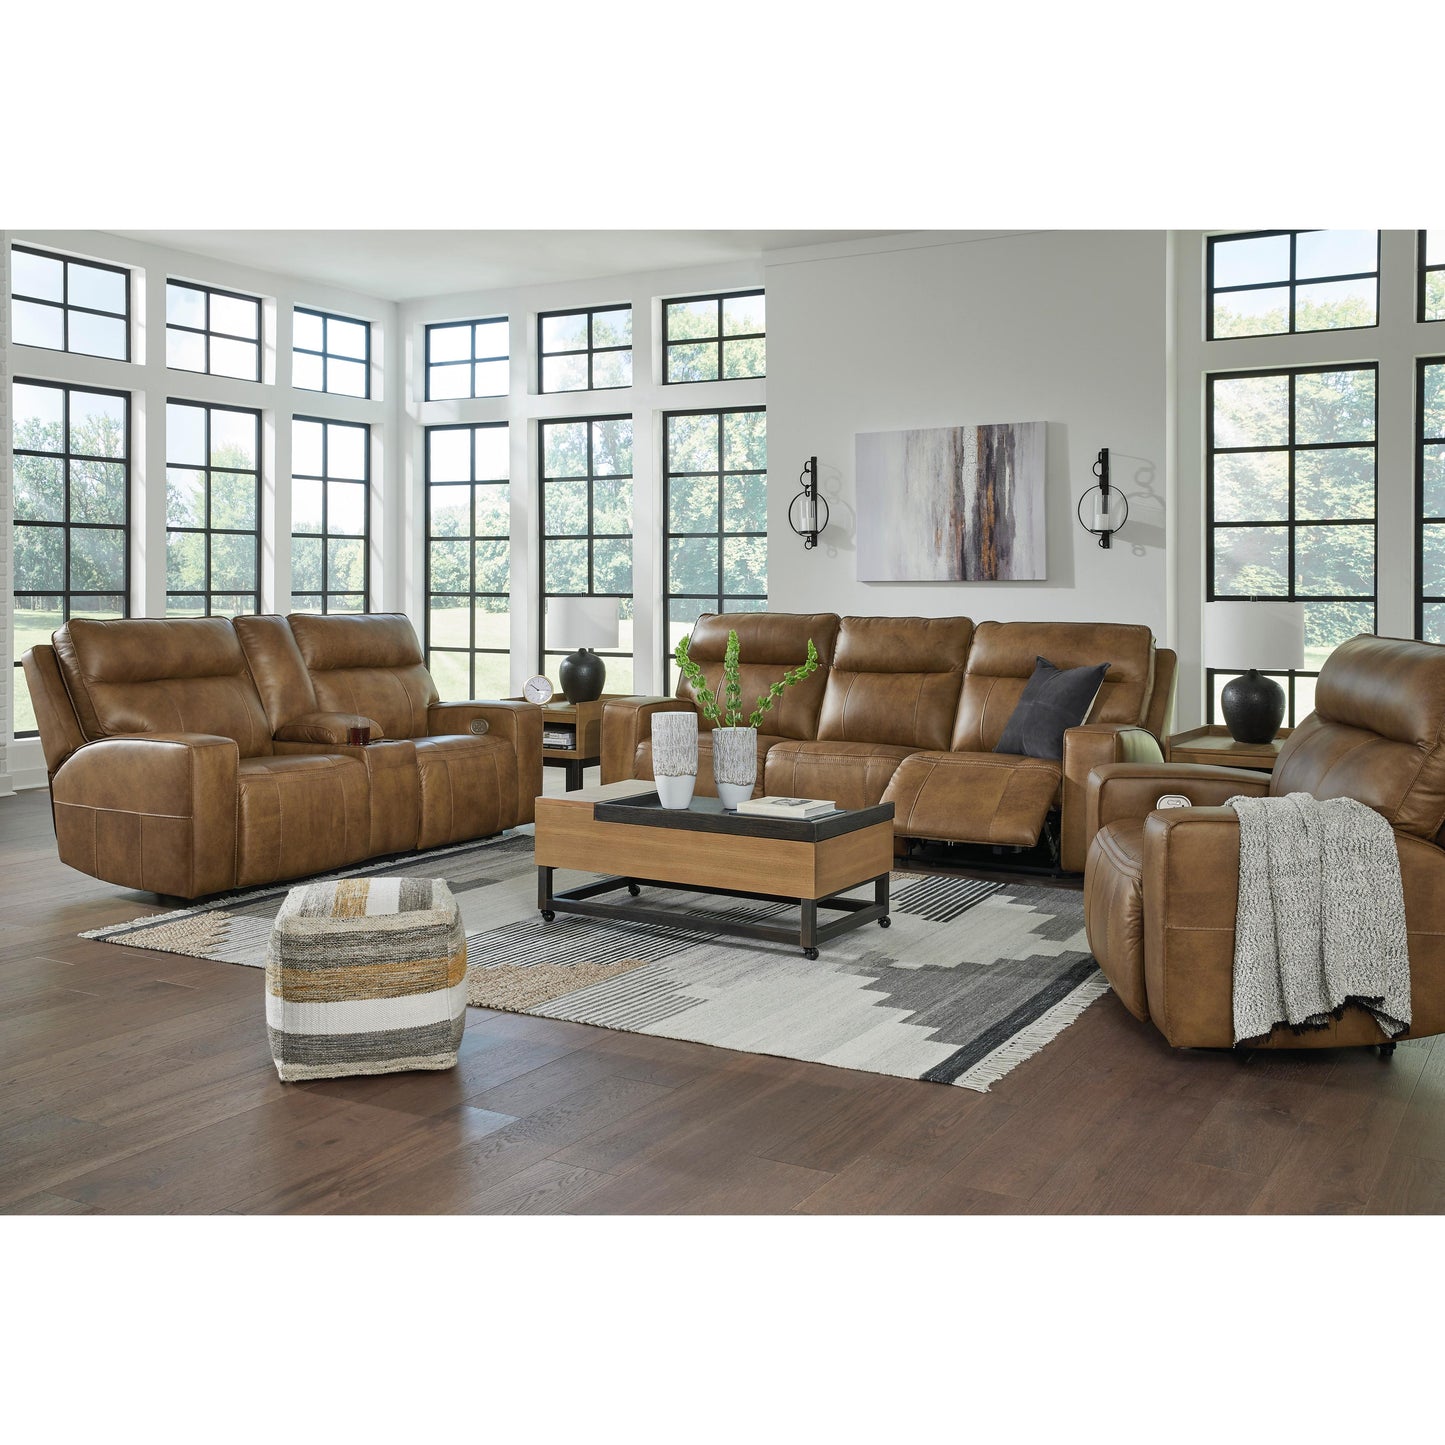 Signature Design by Ashley Game Plan Power Leather Recliner U1520682 IMAGE 9